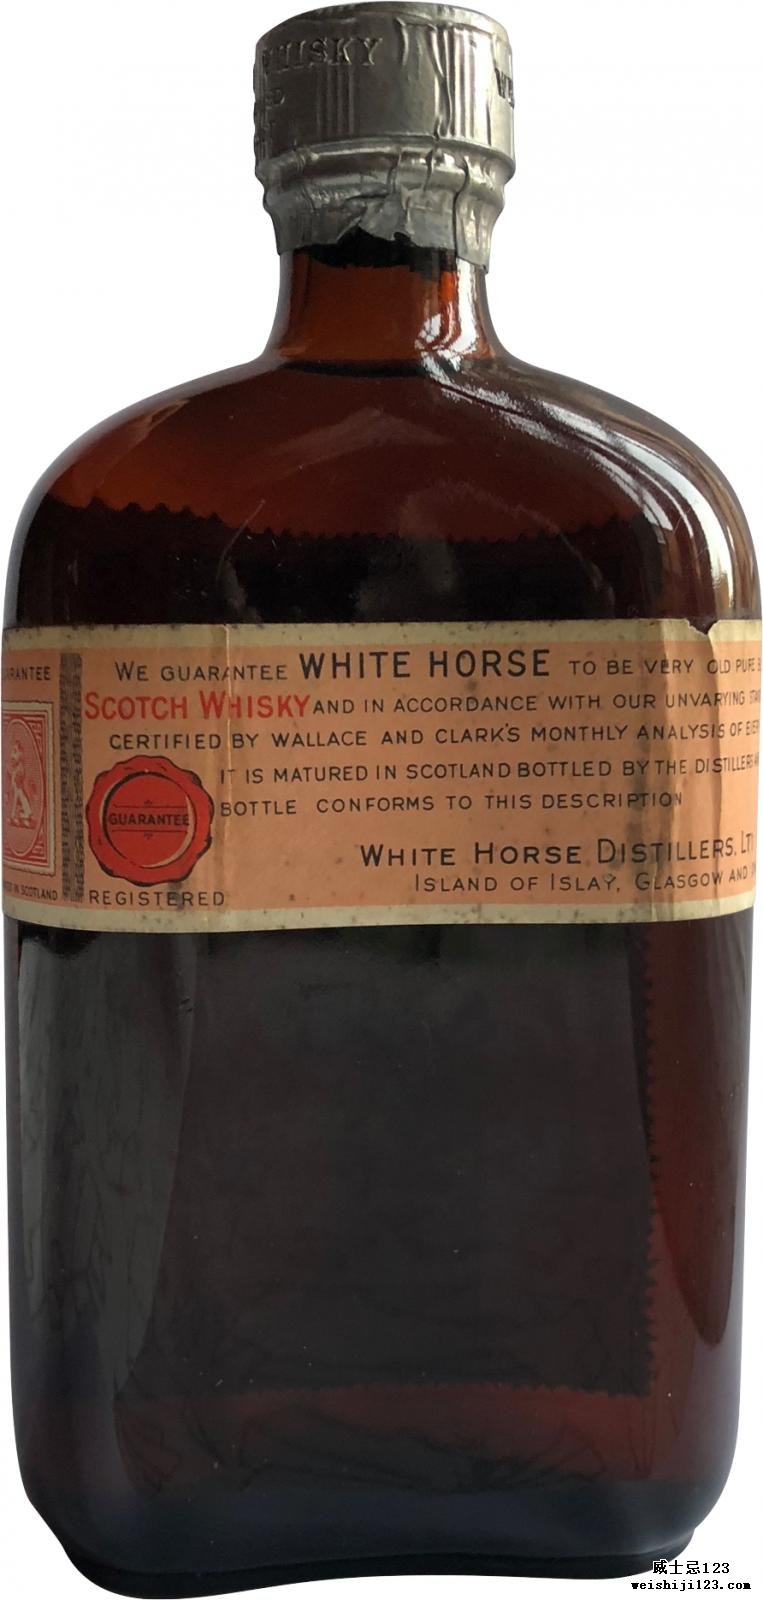 White Horse The Old Blend Whisky of the White Horse Cellar